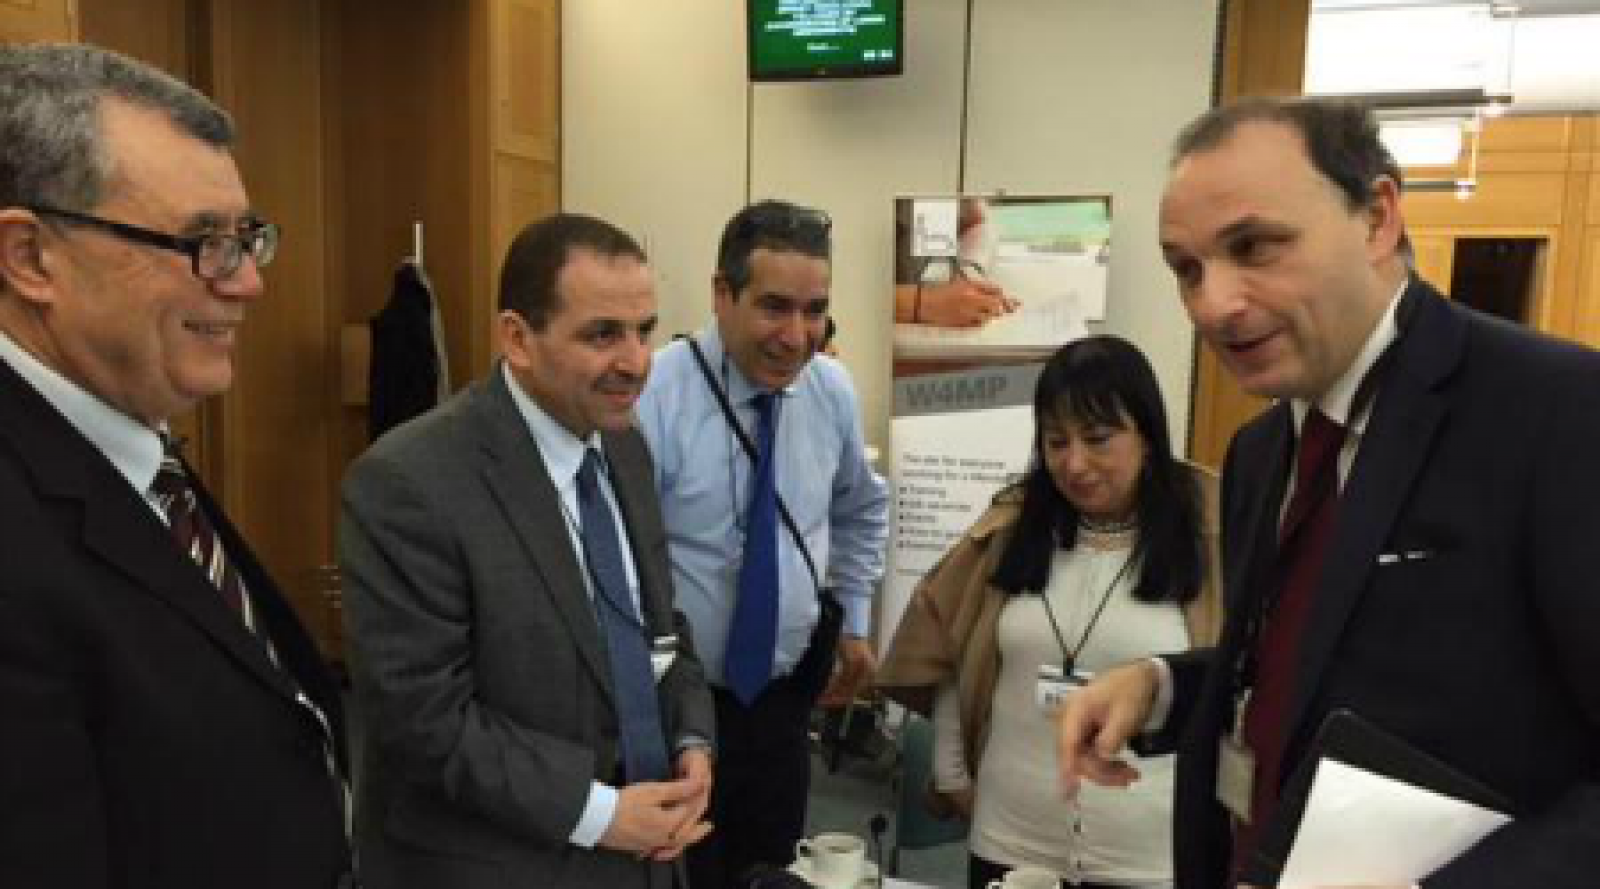 Moroccan MPs Focus on Citizen Outreach in Visit to British Parliament